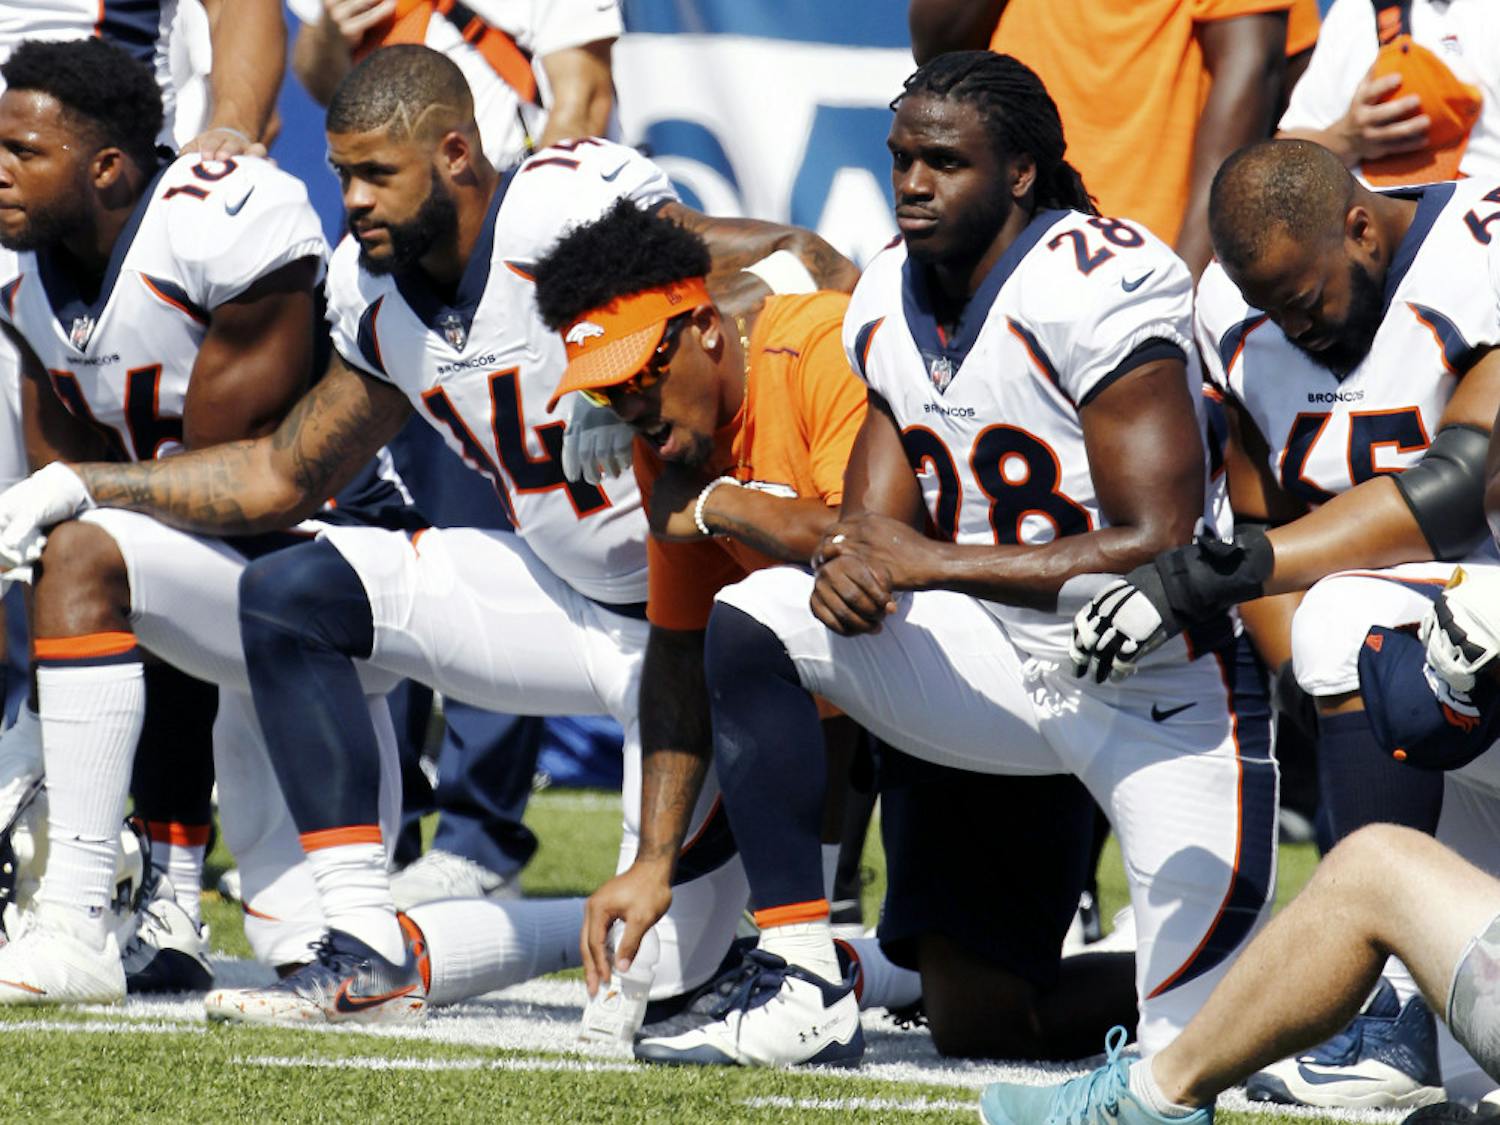 Denver Broncos players, including Jamaal Charles (28) kneel during the national anthem prior to an NFL football game against the Buffalo Bills, Sunday, Sept. 24, 2017, in Orchard Park, N.Y. (AP Photo/Jeffrey T. Barnes)